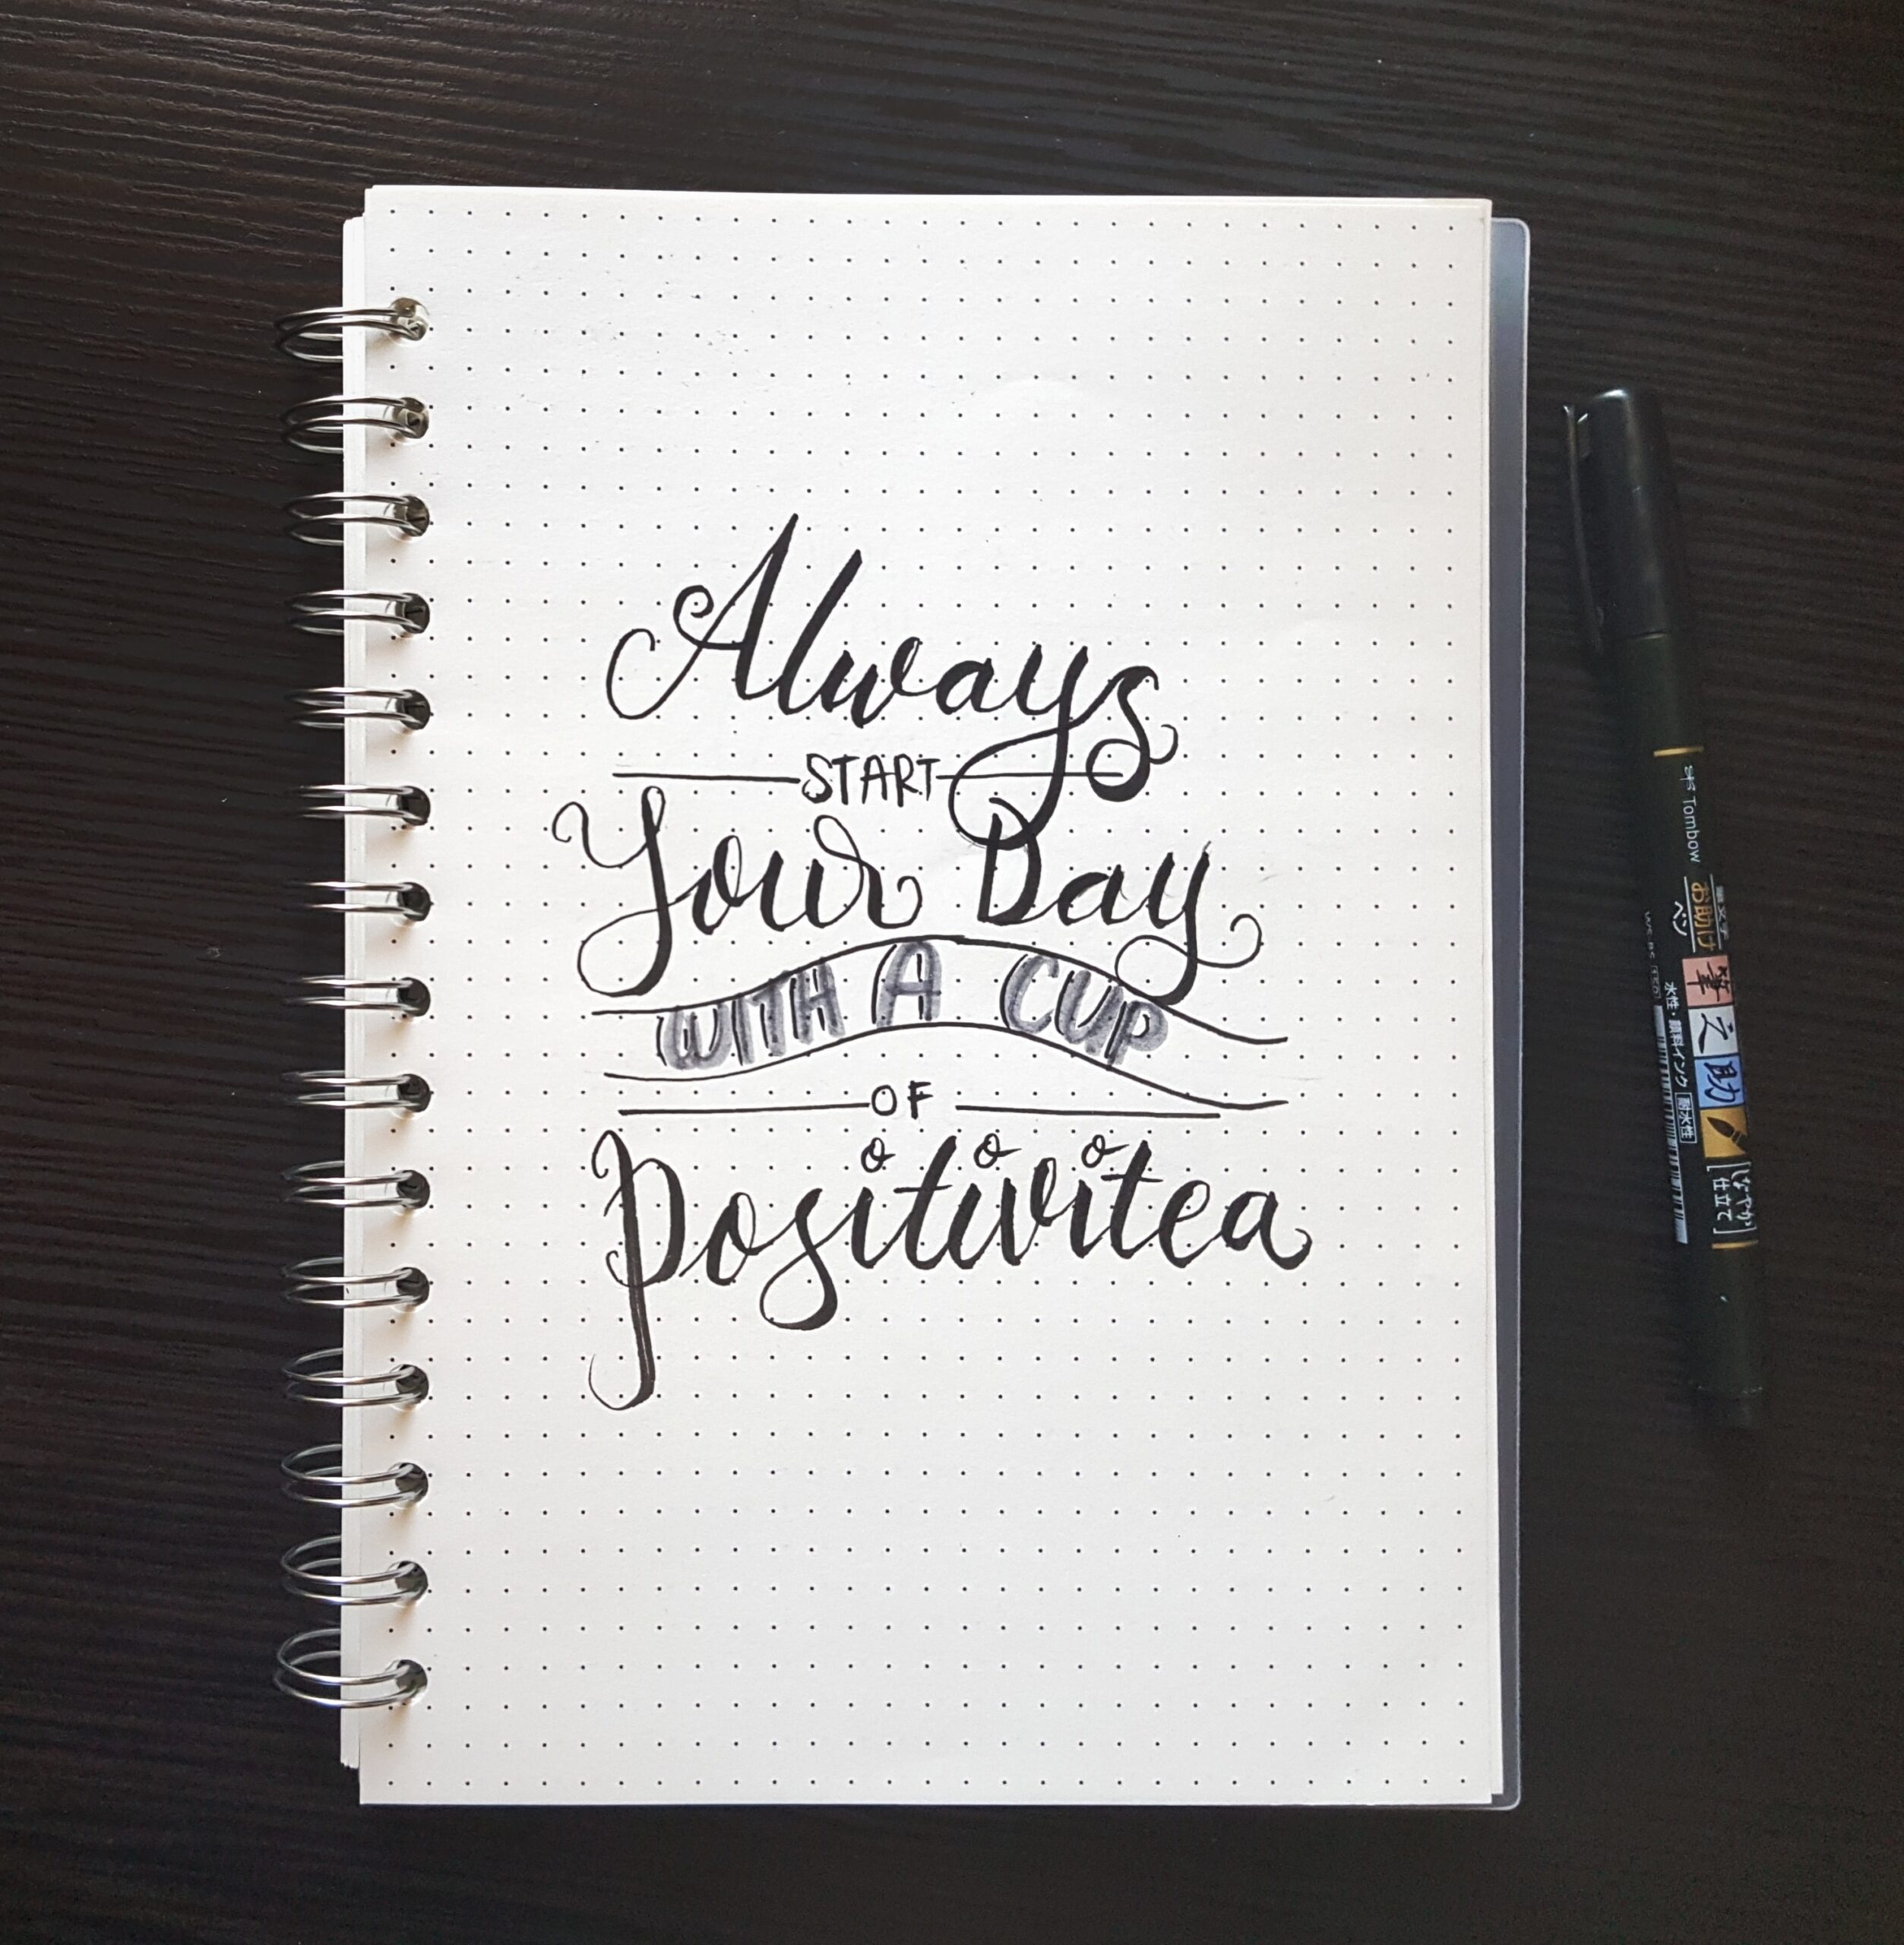 30 Inspirational Daily Quotes For Work